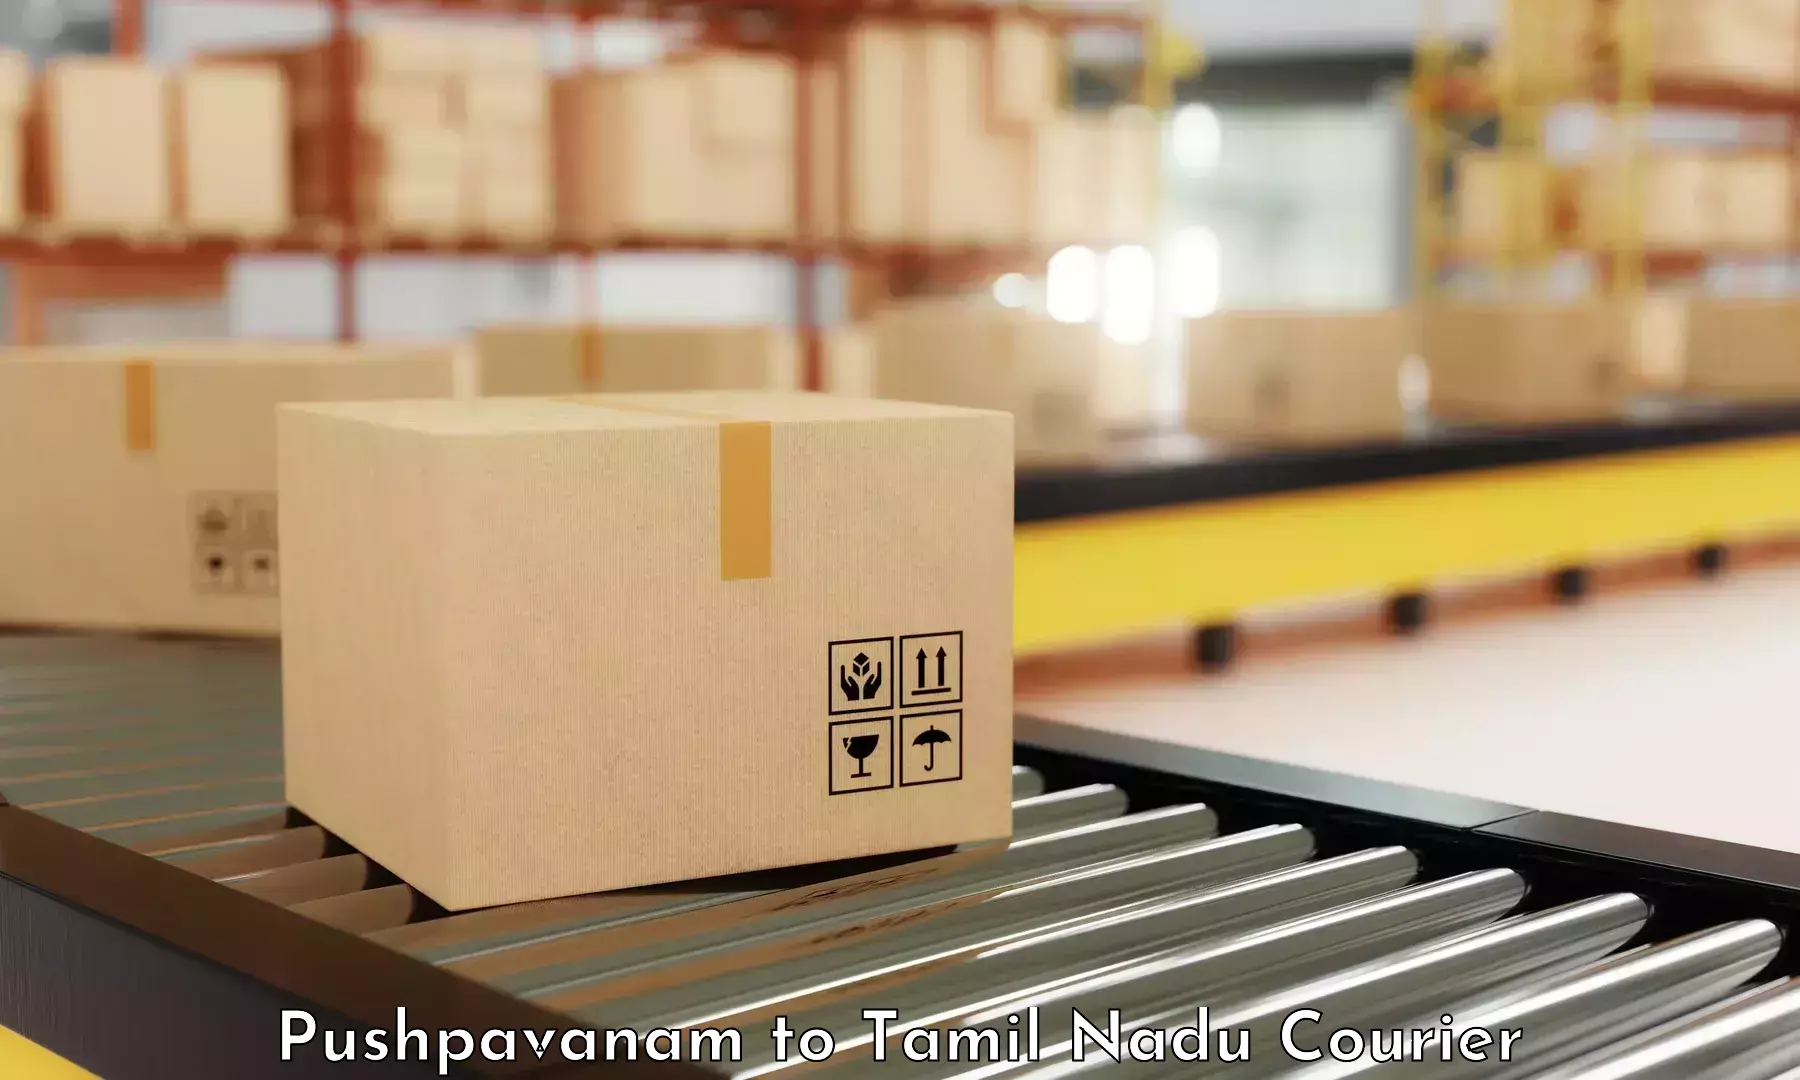 Reliable delivery network Pushpavanam to Tuticorin